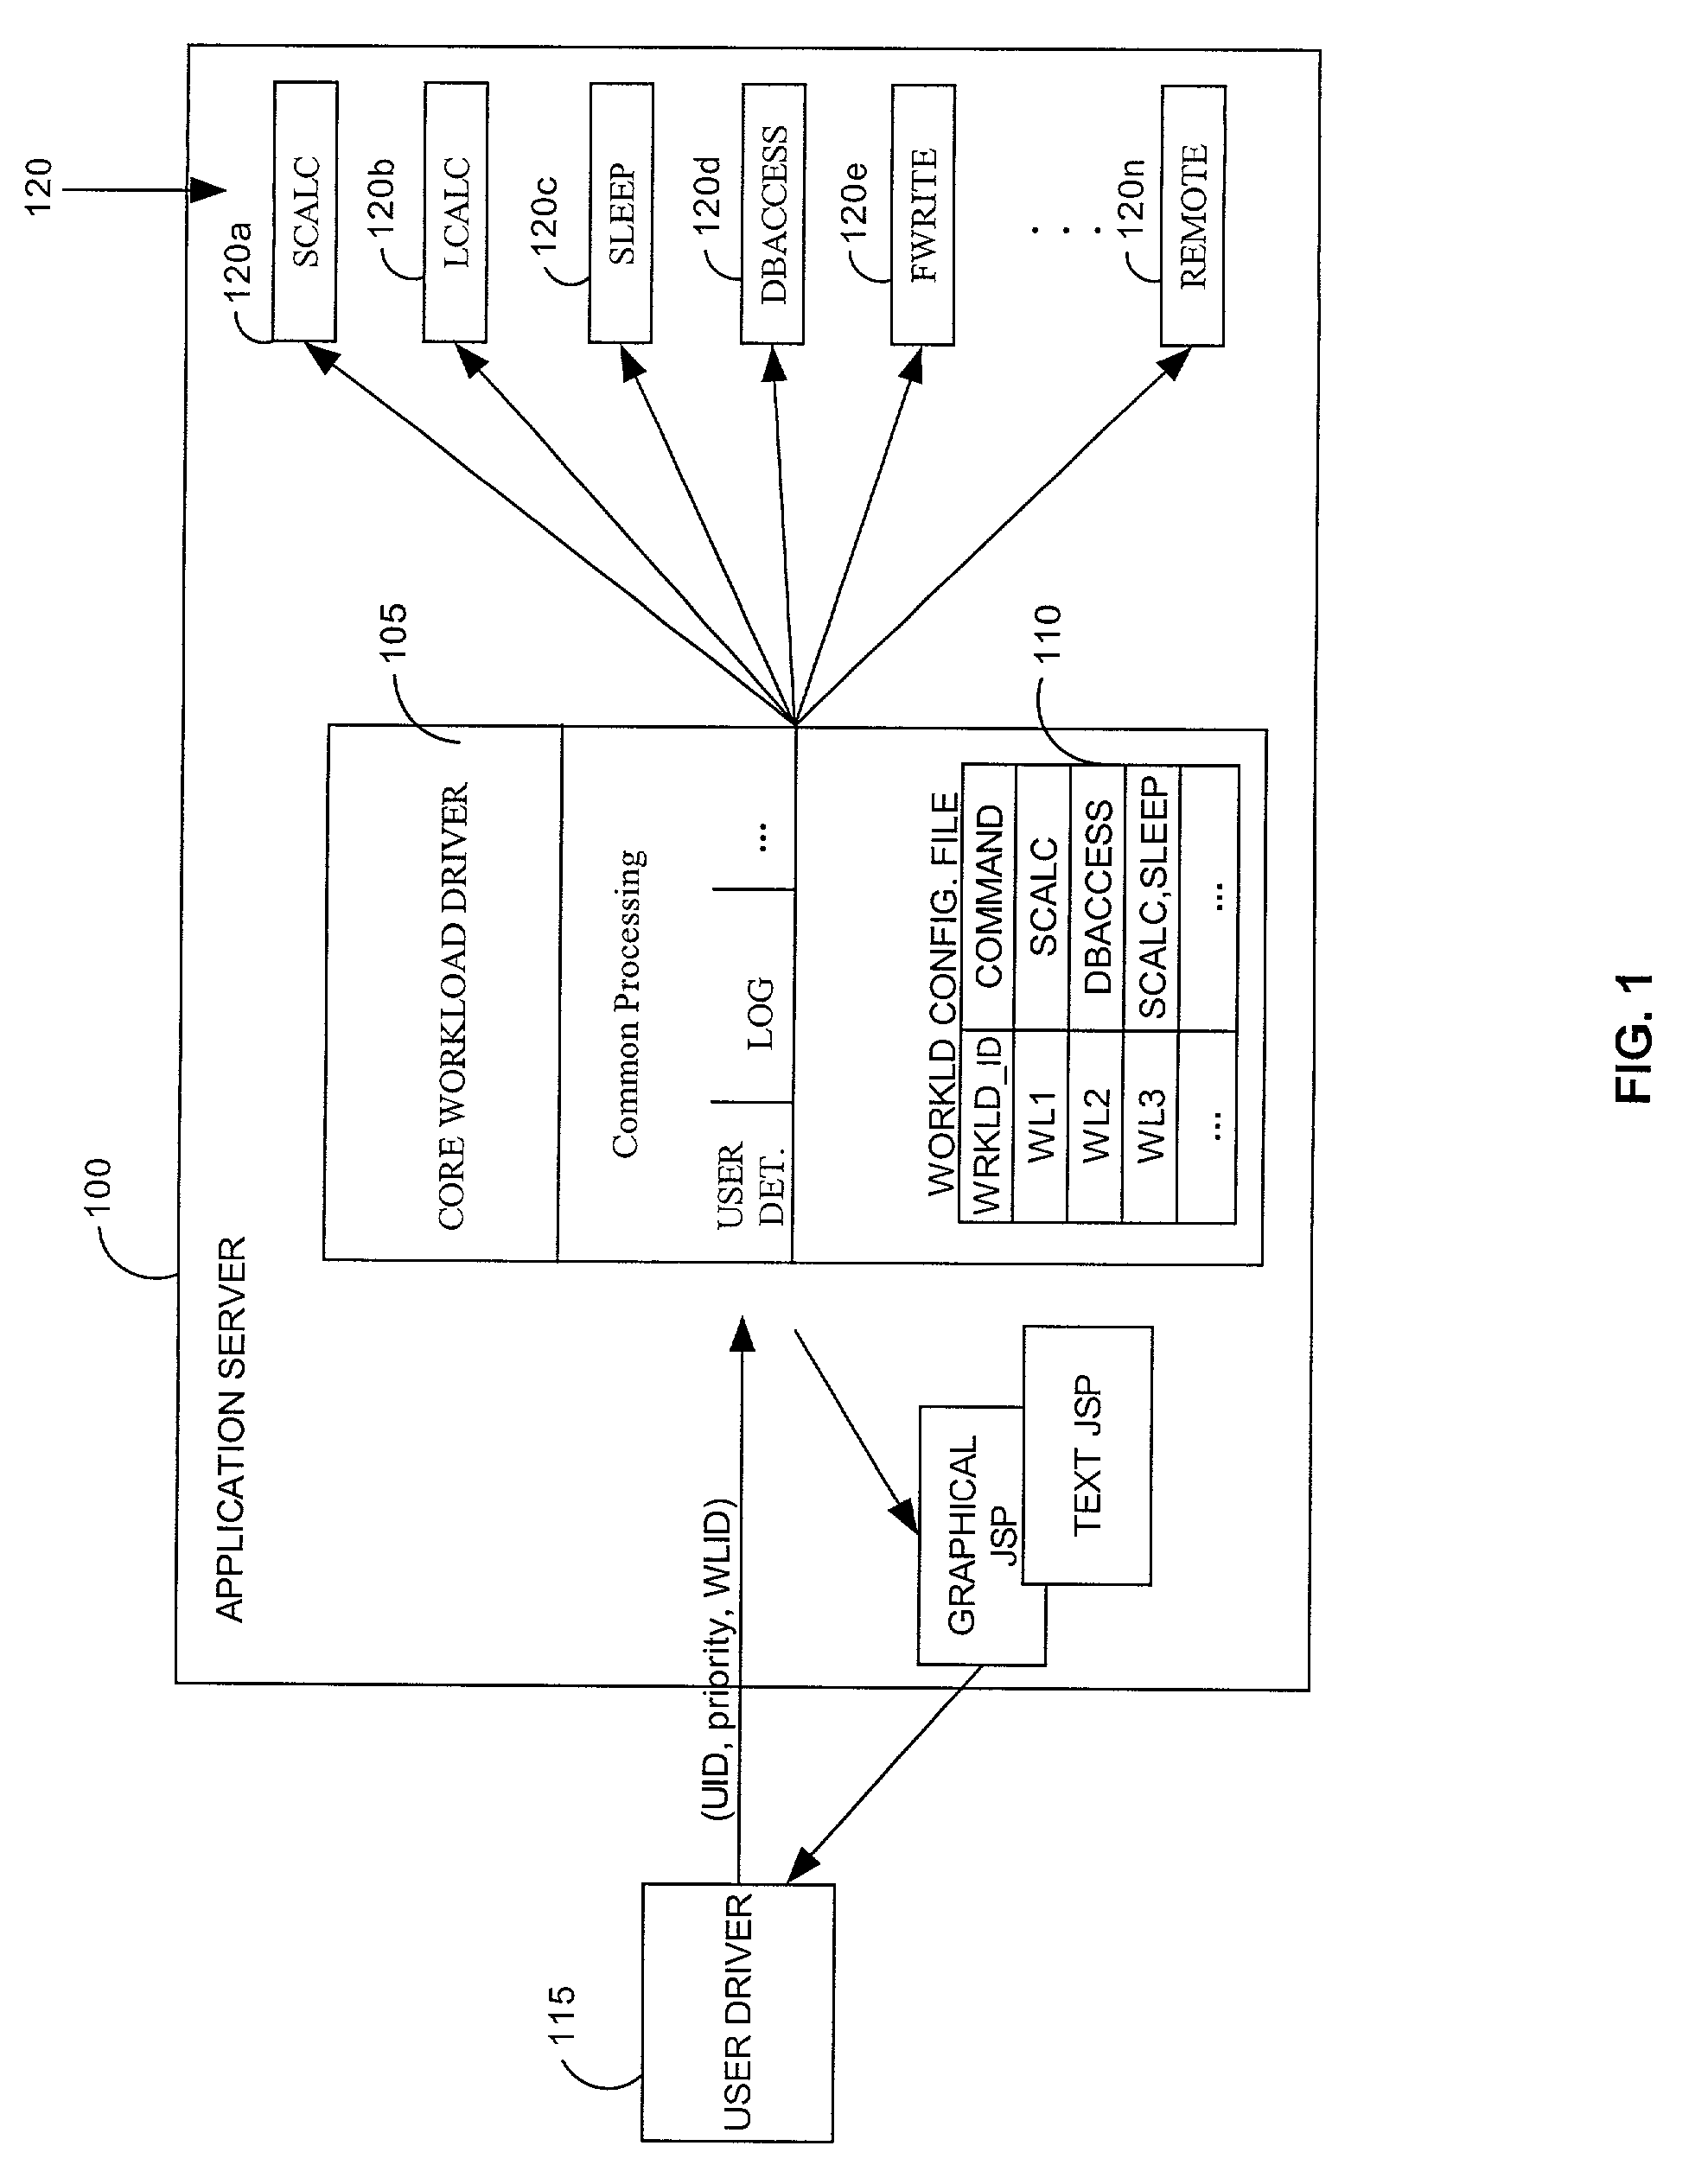 Method and apparatus for simulating application workloads on an e-business application server